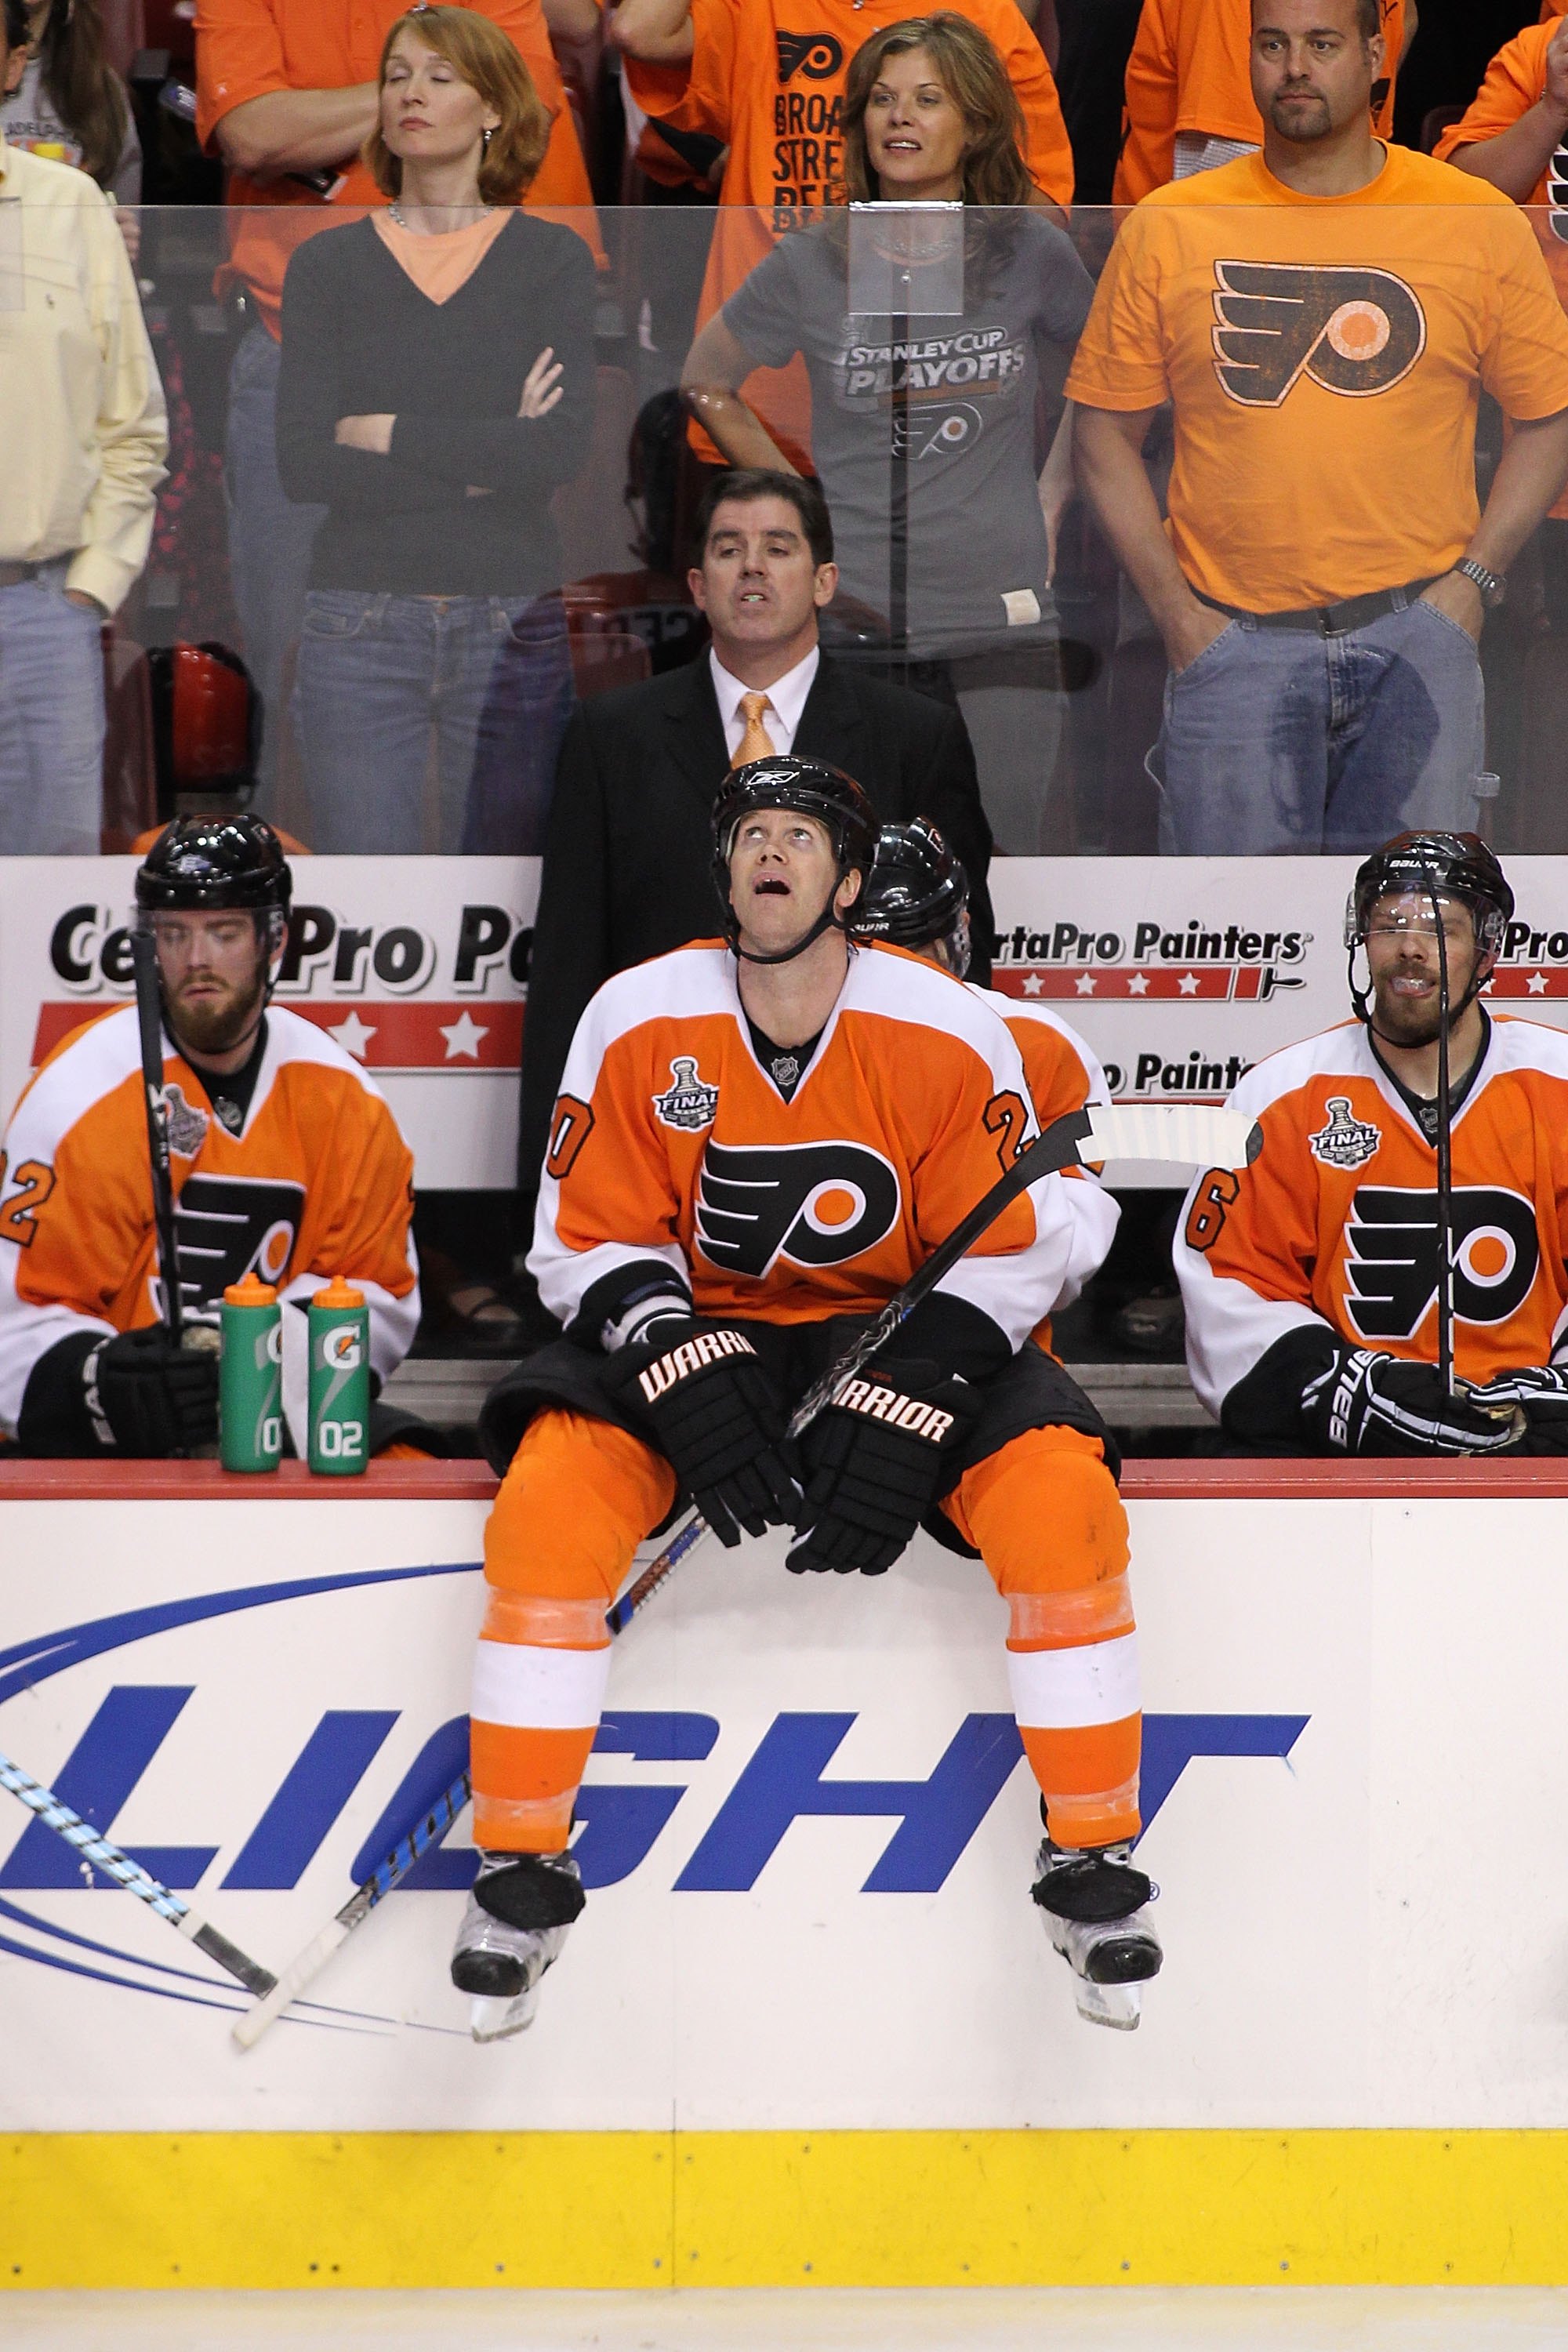 FLYERS: Pronger's prognosis might not be so grim (With Video) – Delco Times